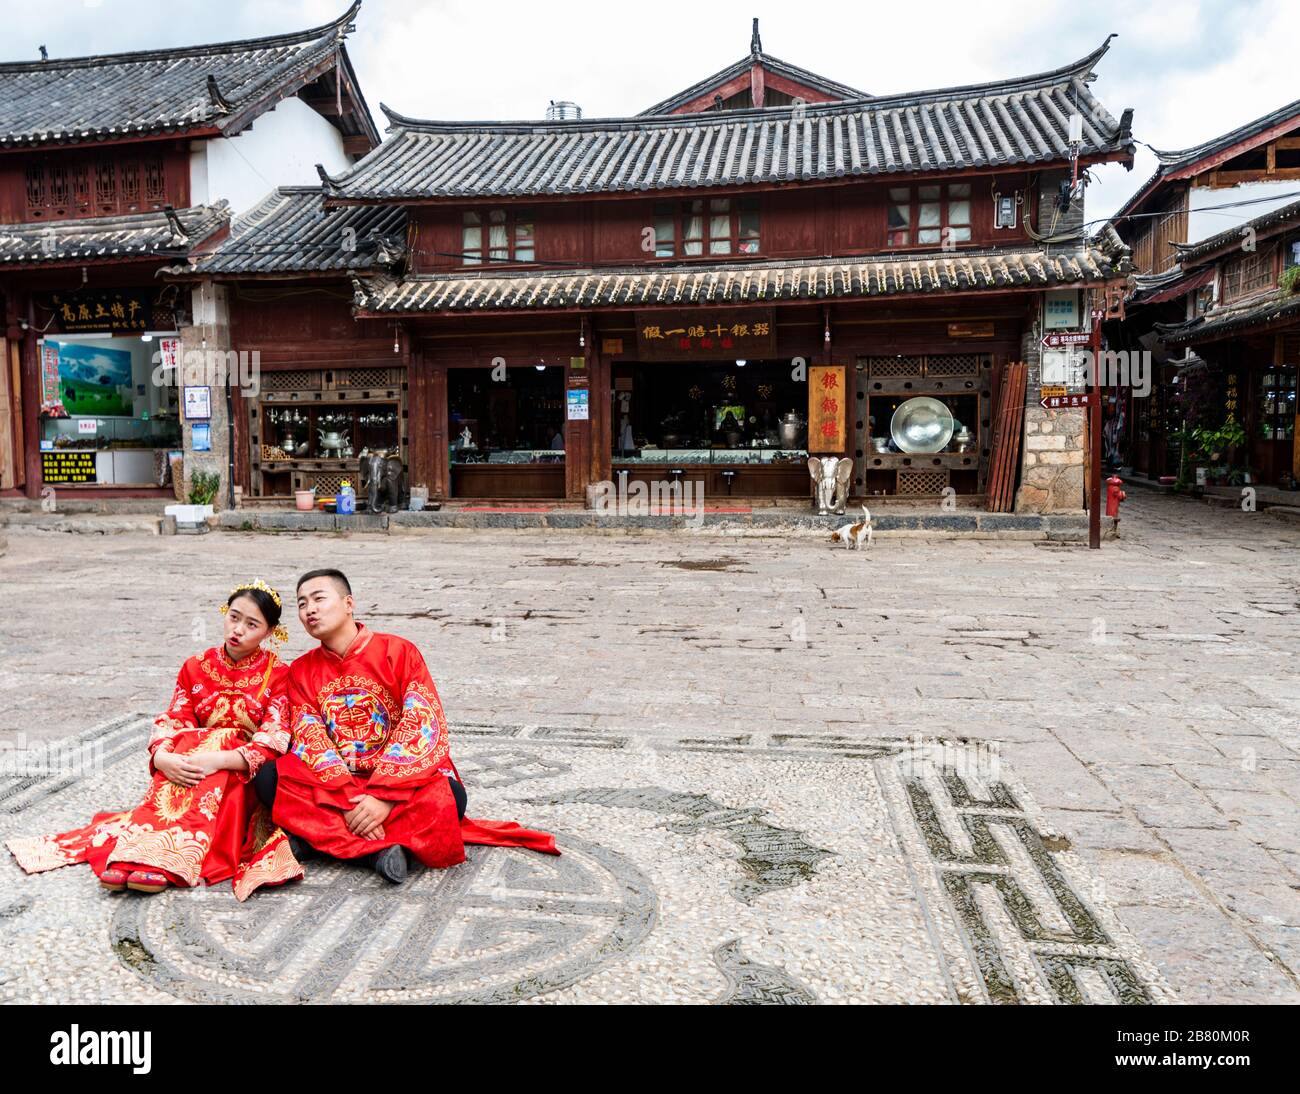 A newlywed couple wearing traditional costumes posing for wedding photos in the ancient town of Shuhe near Lijiang, Yunnan Province, China. Stock Photo